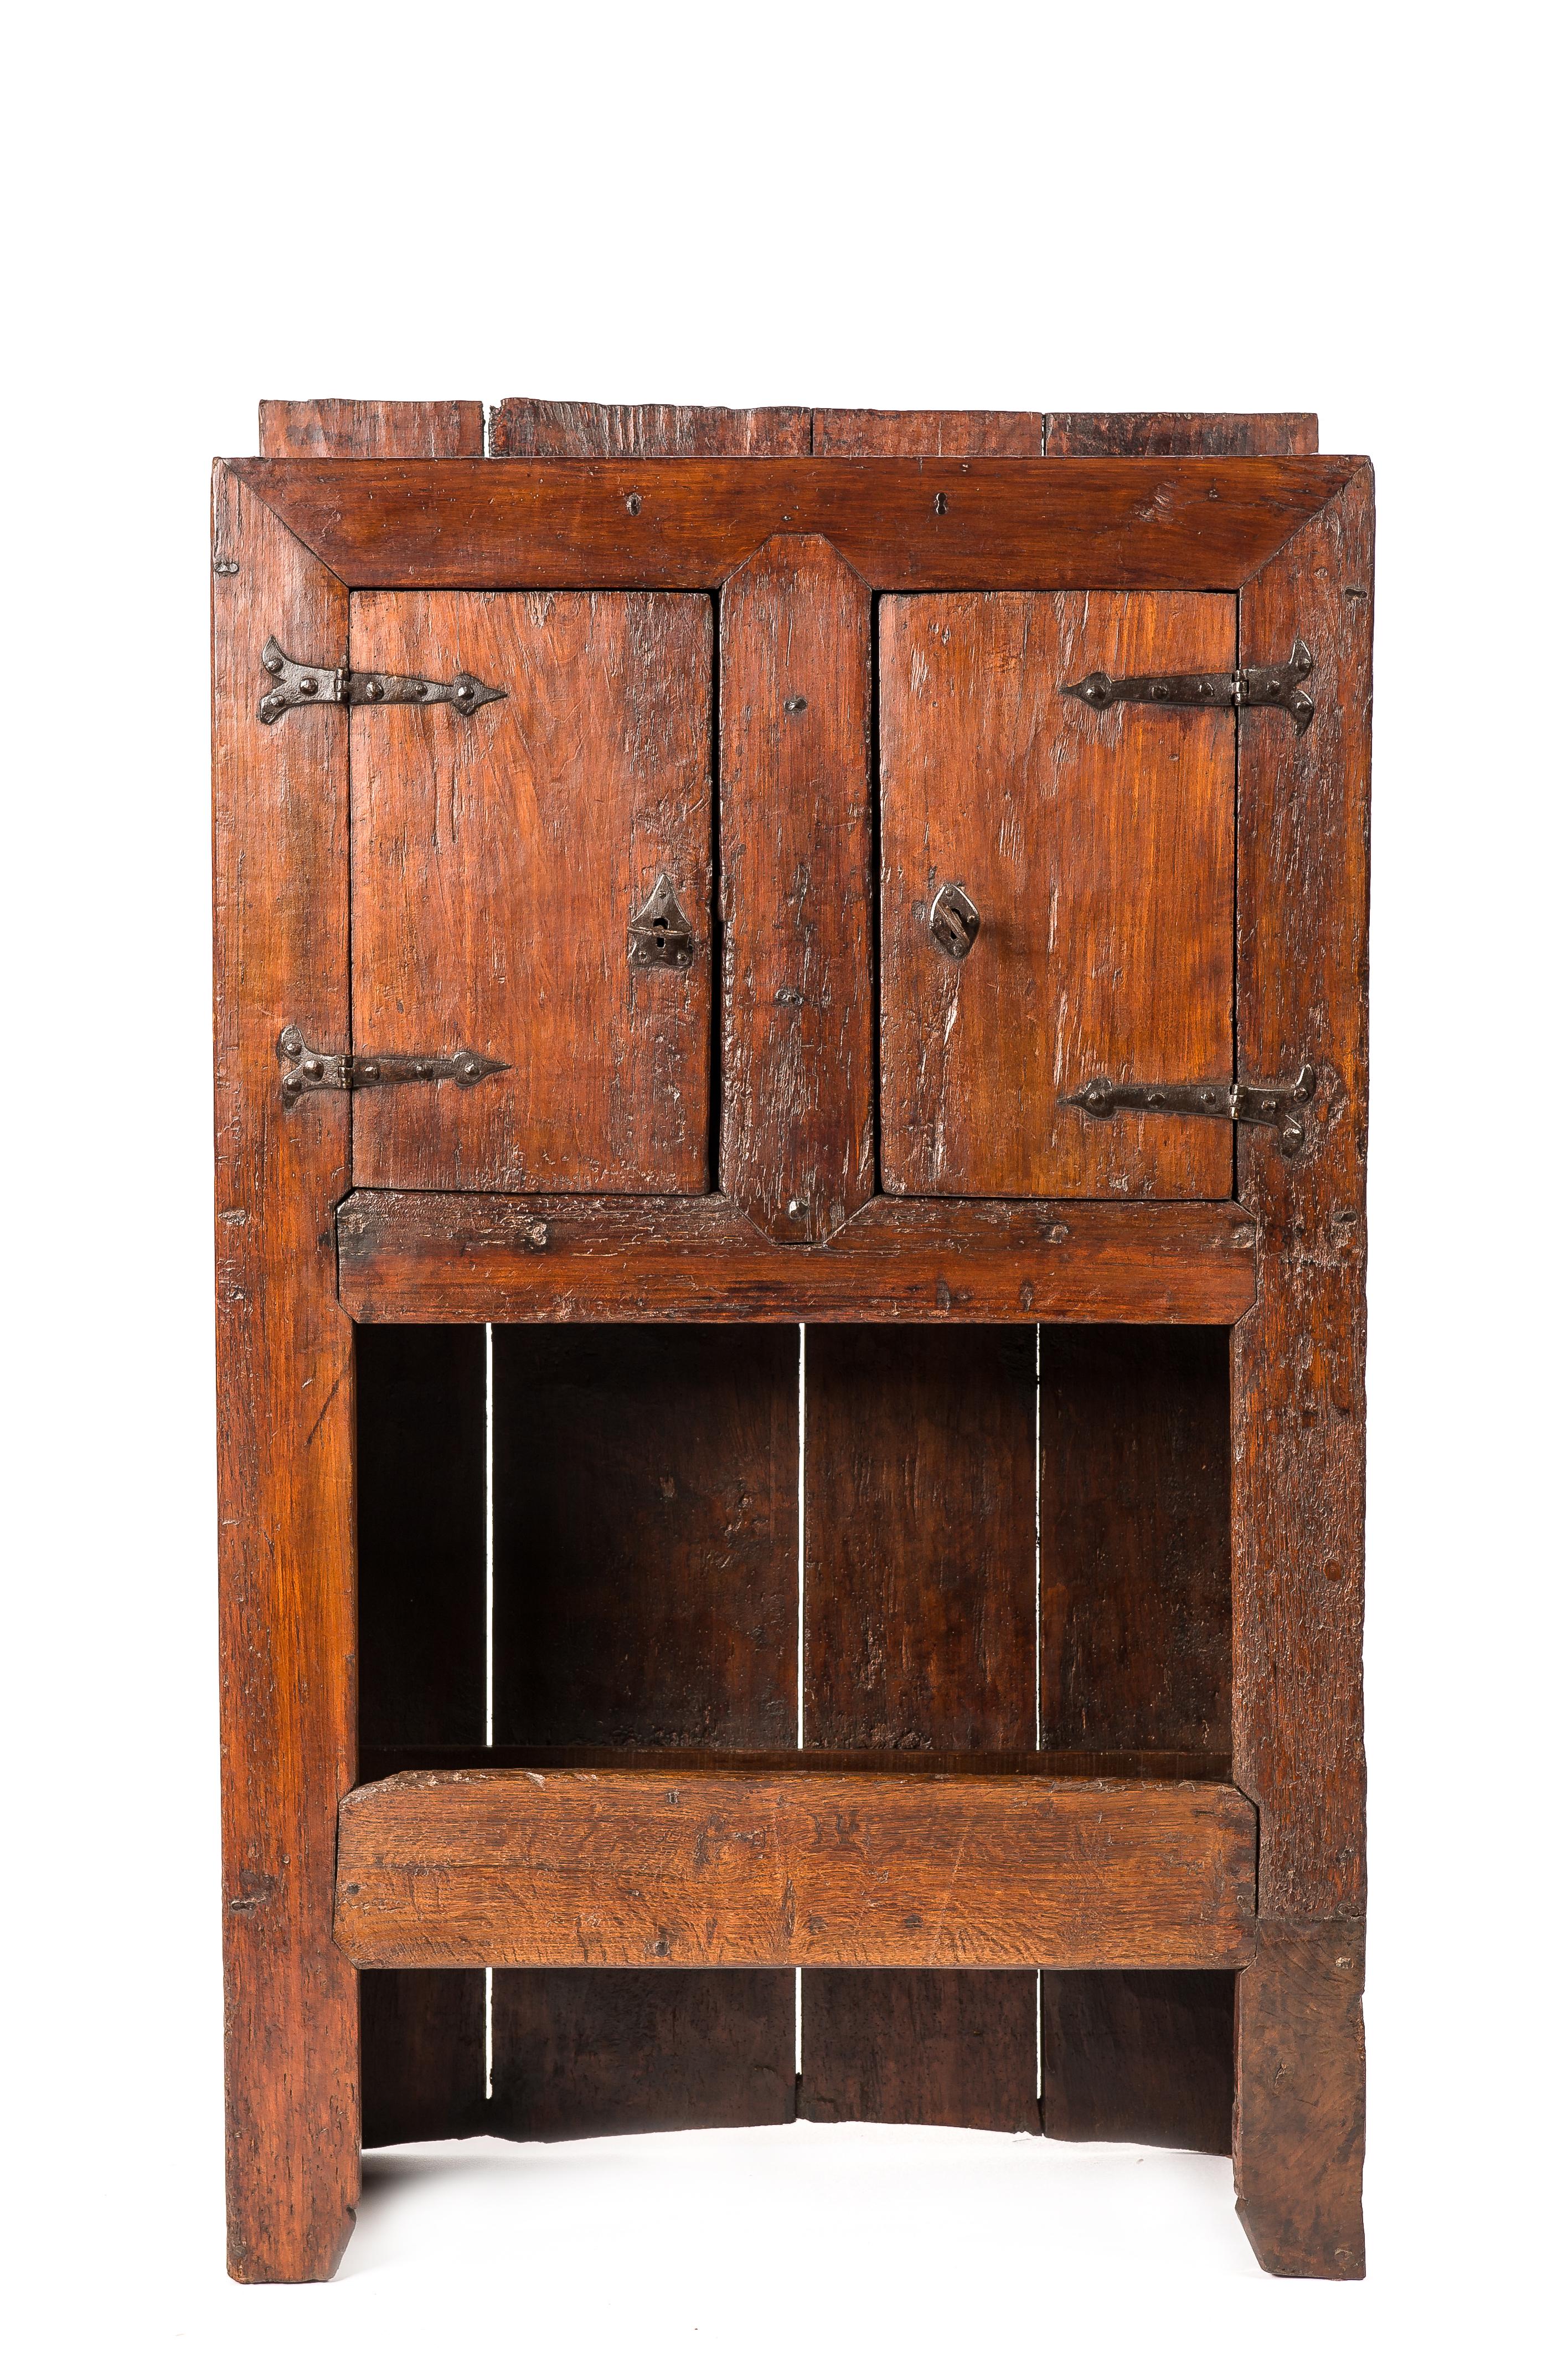 This beautiful rustic cabinet was made in rural Spain in the early 18th century circa 1720. 
Its sleek appearance with all the wood jointing exposed displays the purity of the design and the craftsmanship of its maker. It was almost completely made